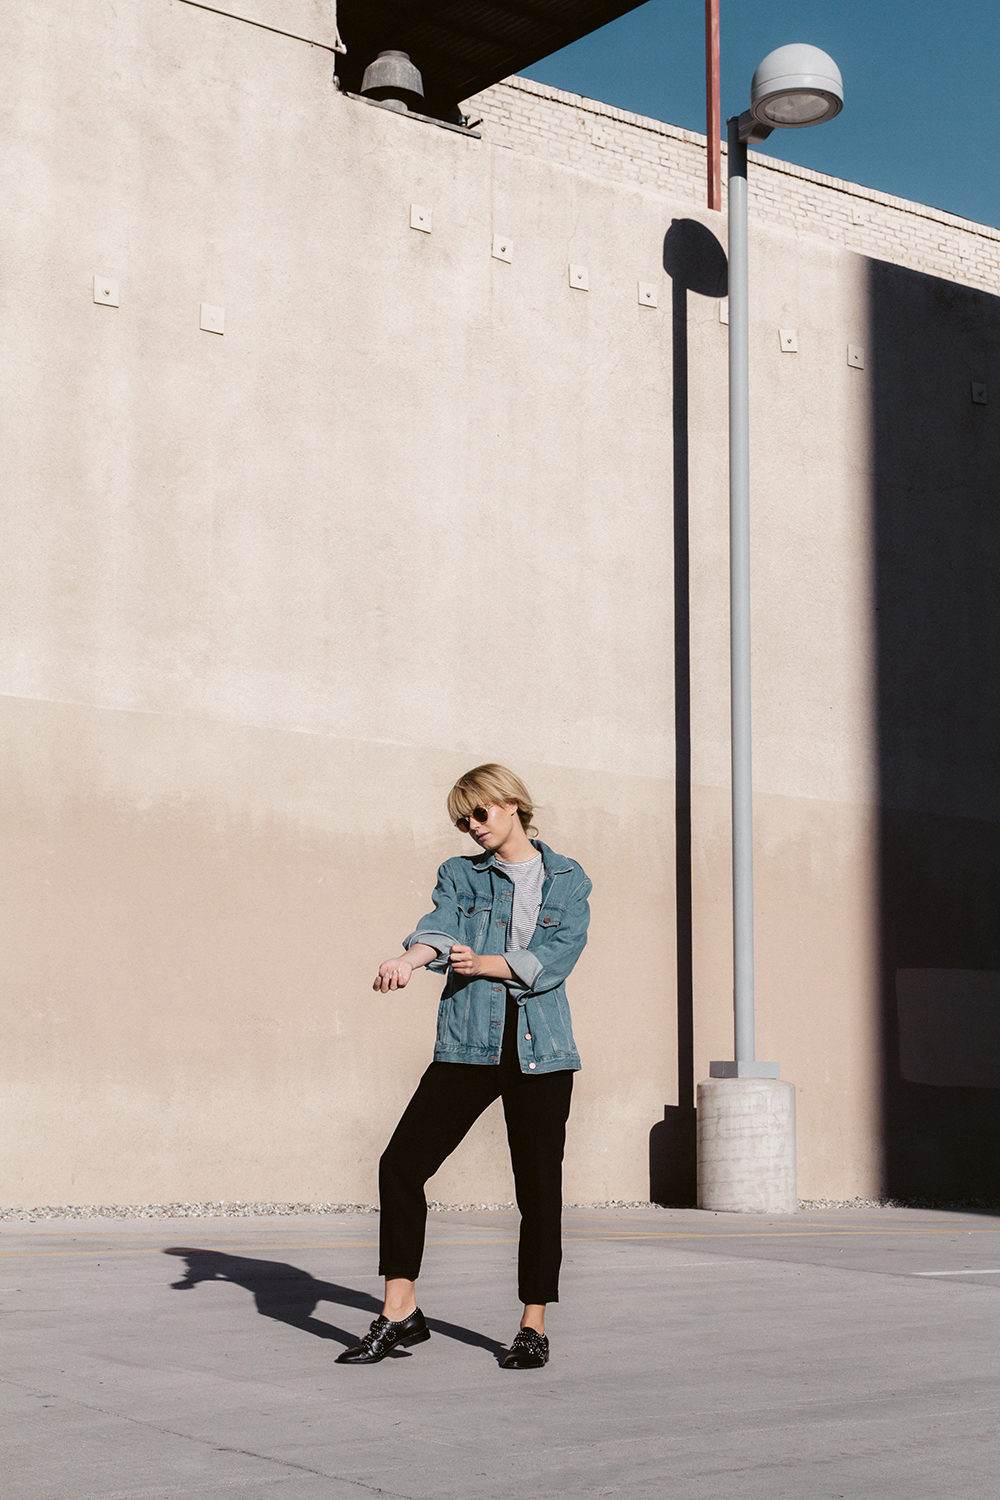 The Jacket | Just Another Fashion Blog | by lisa dengler